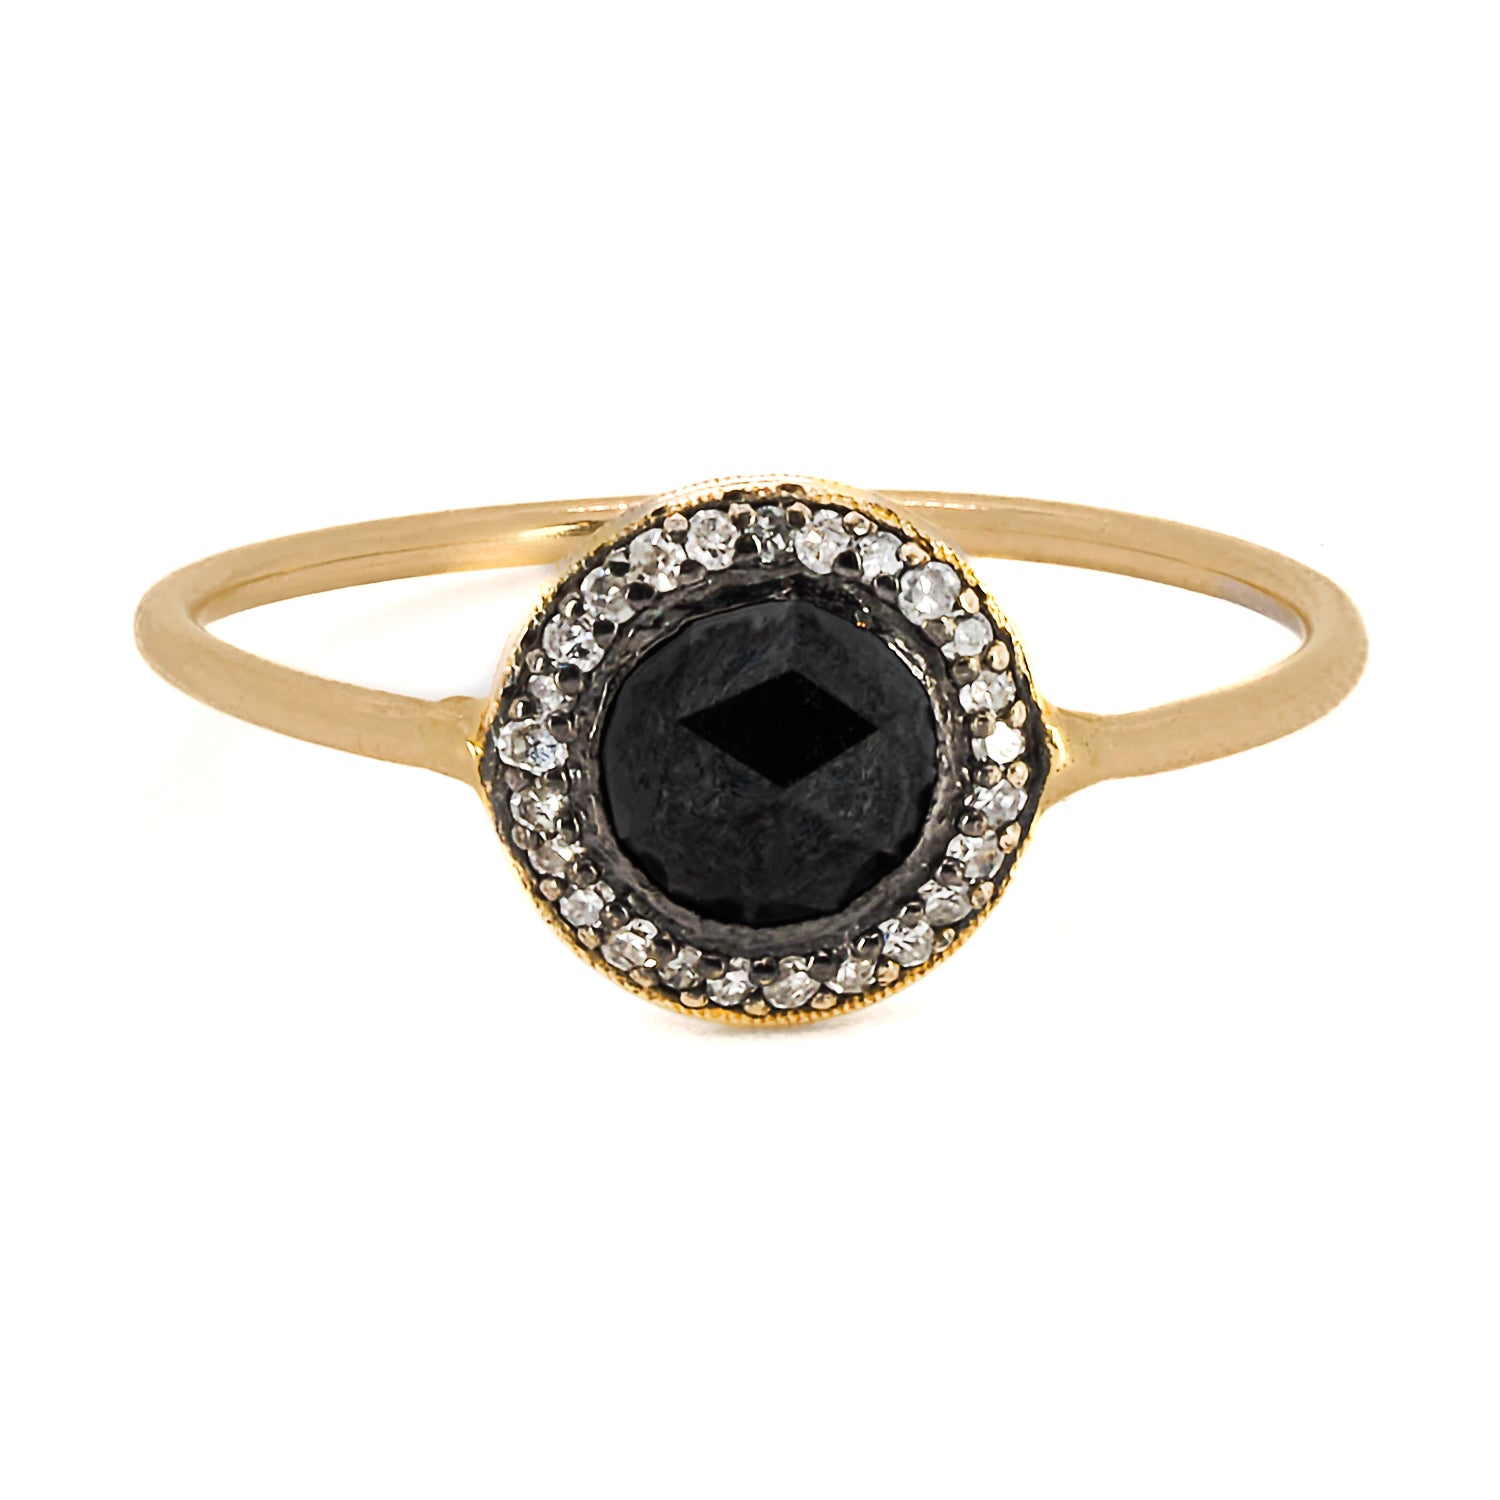 The Mini Black Rose Cut Ring, a striking and elegant accessory featuring high-quality black diamonds and 14k gold.